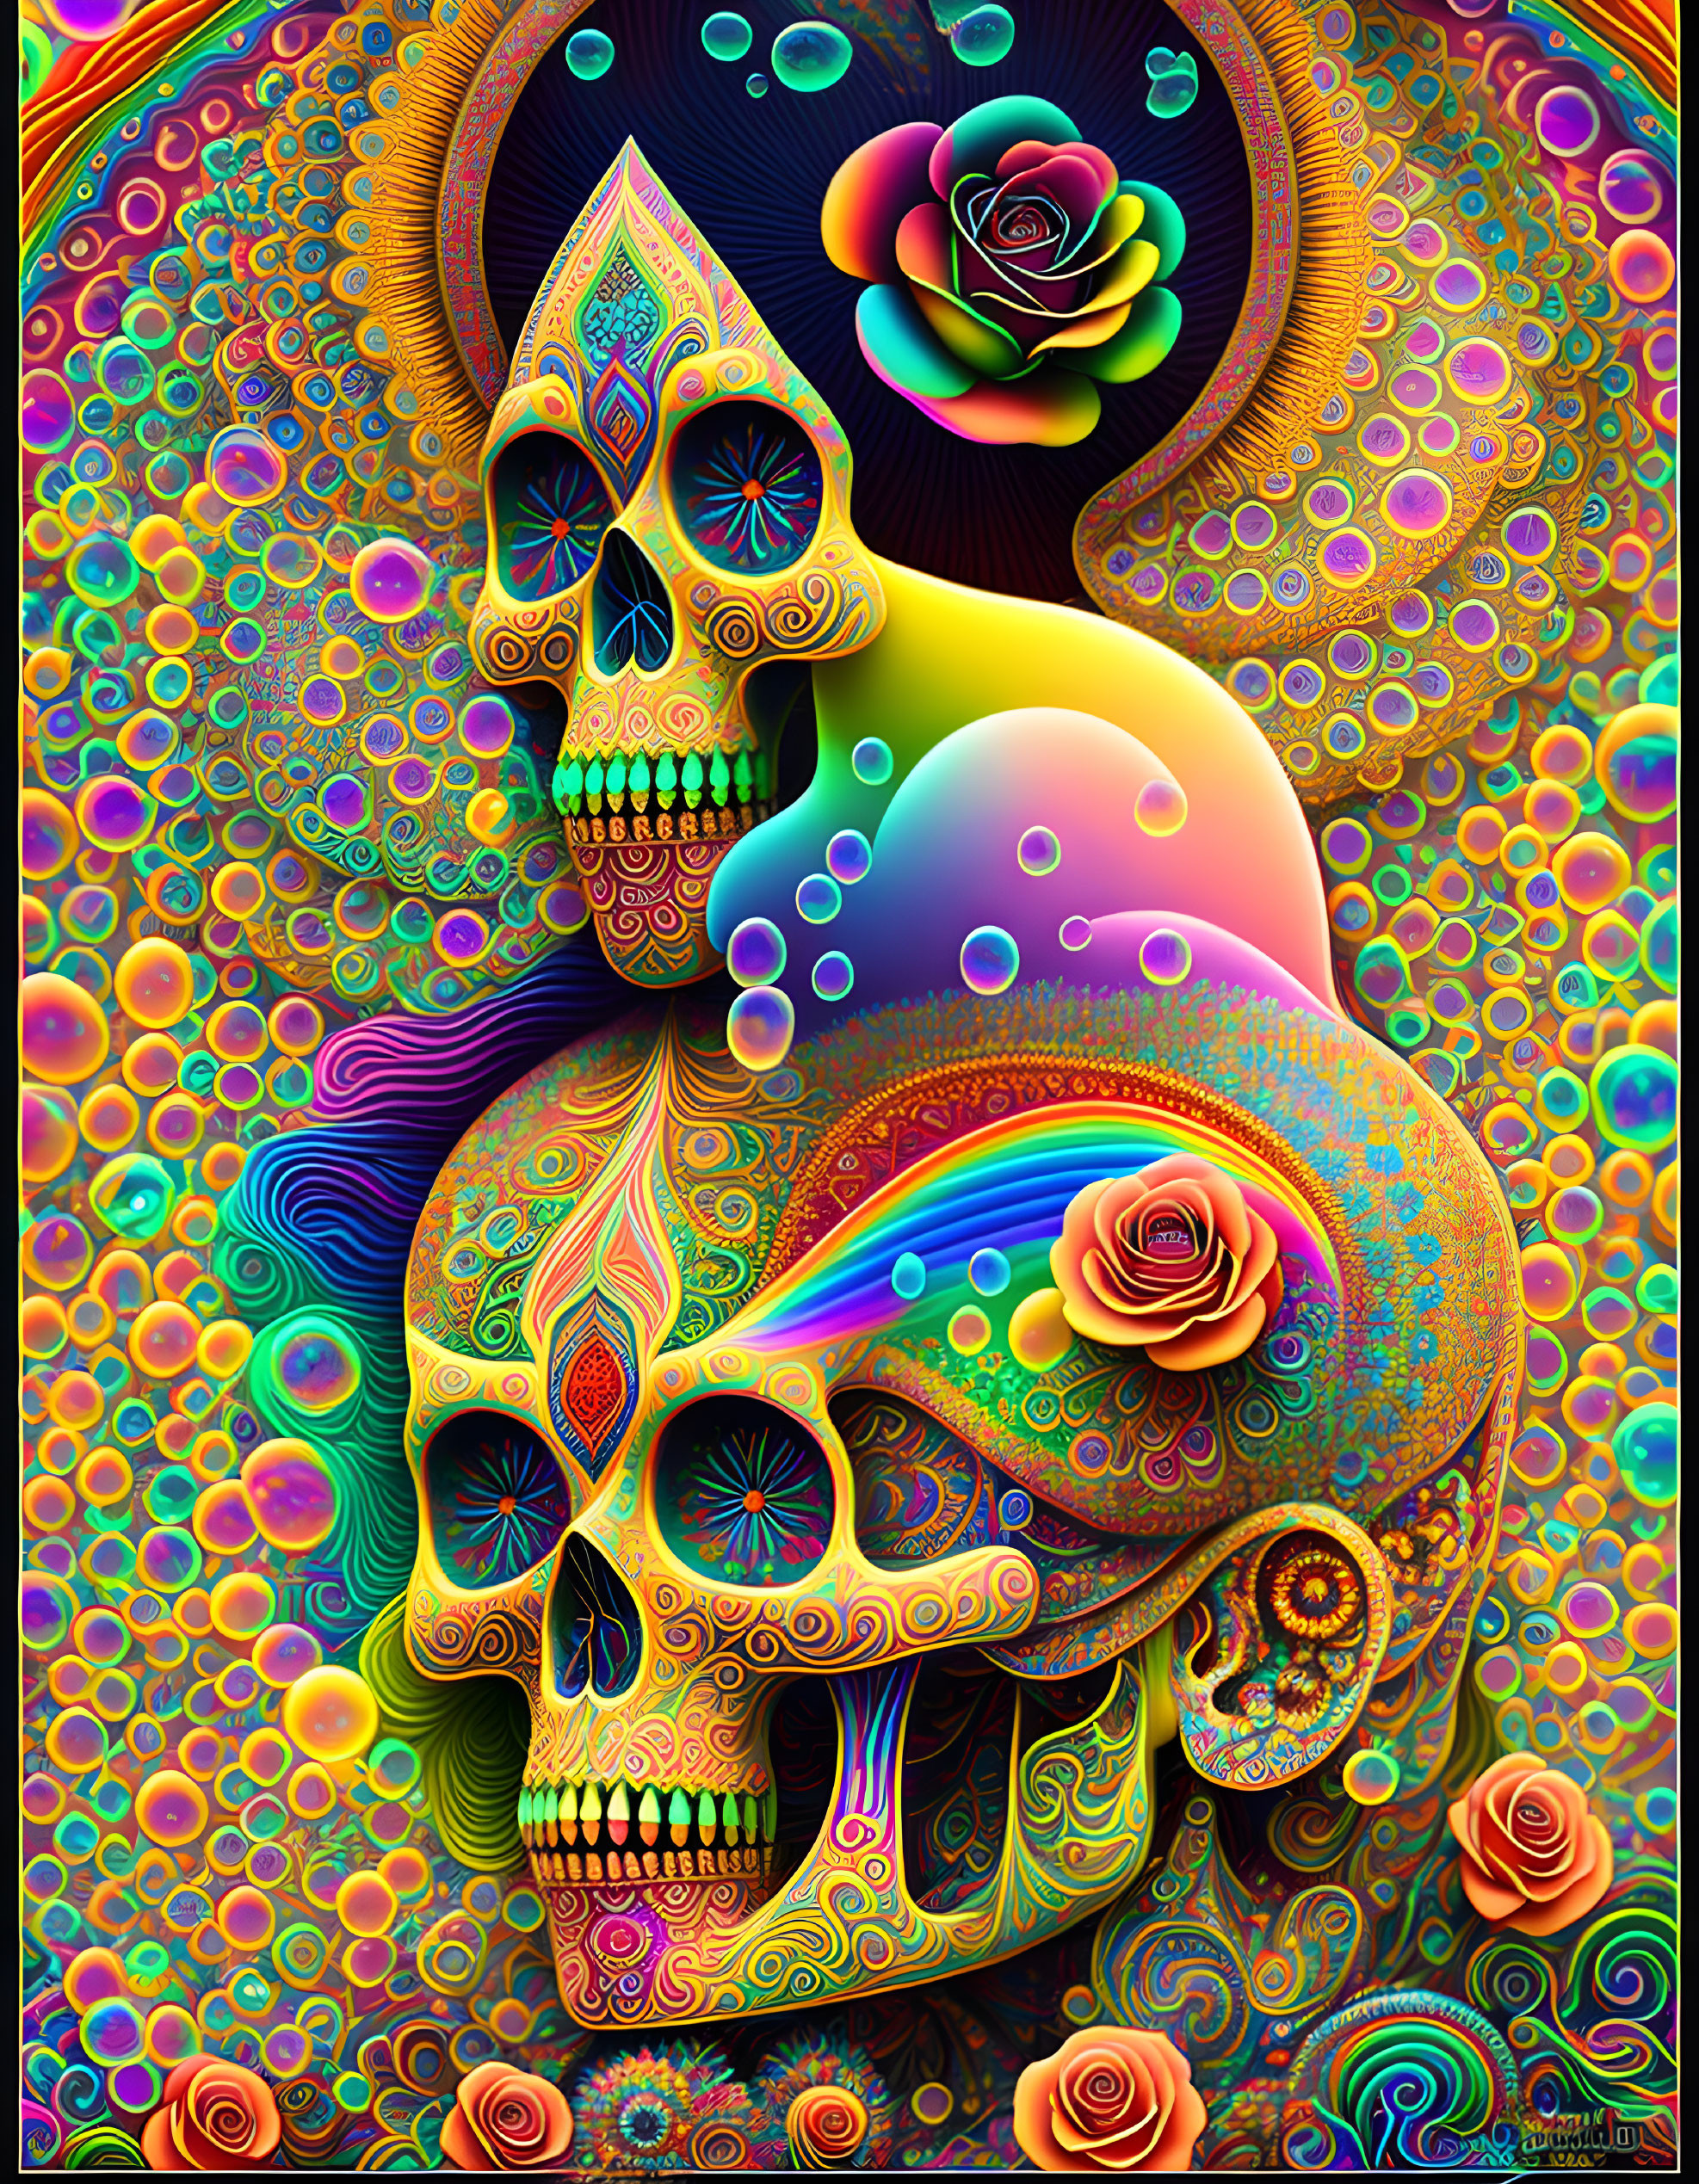 Psychedelic day of the dead